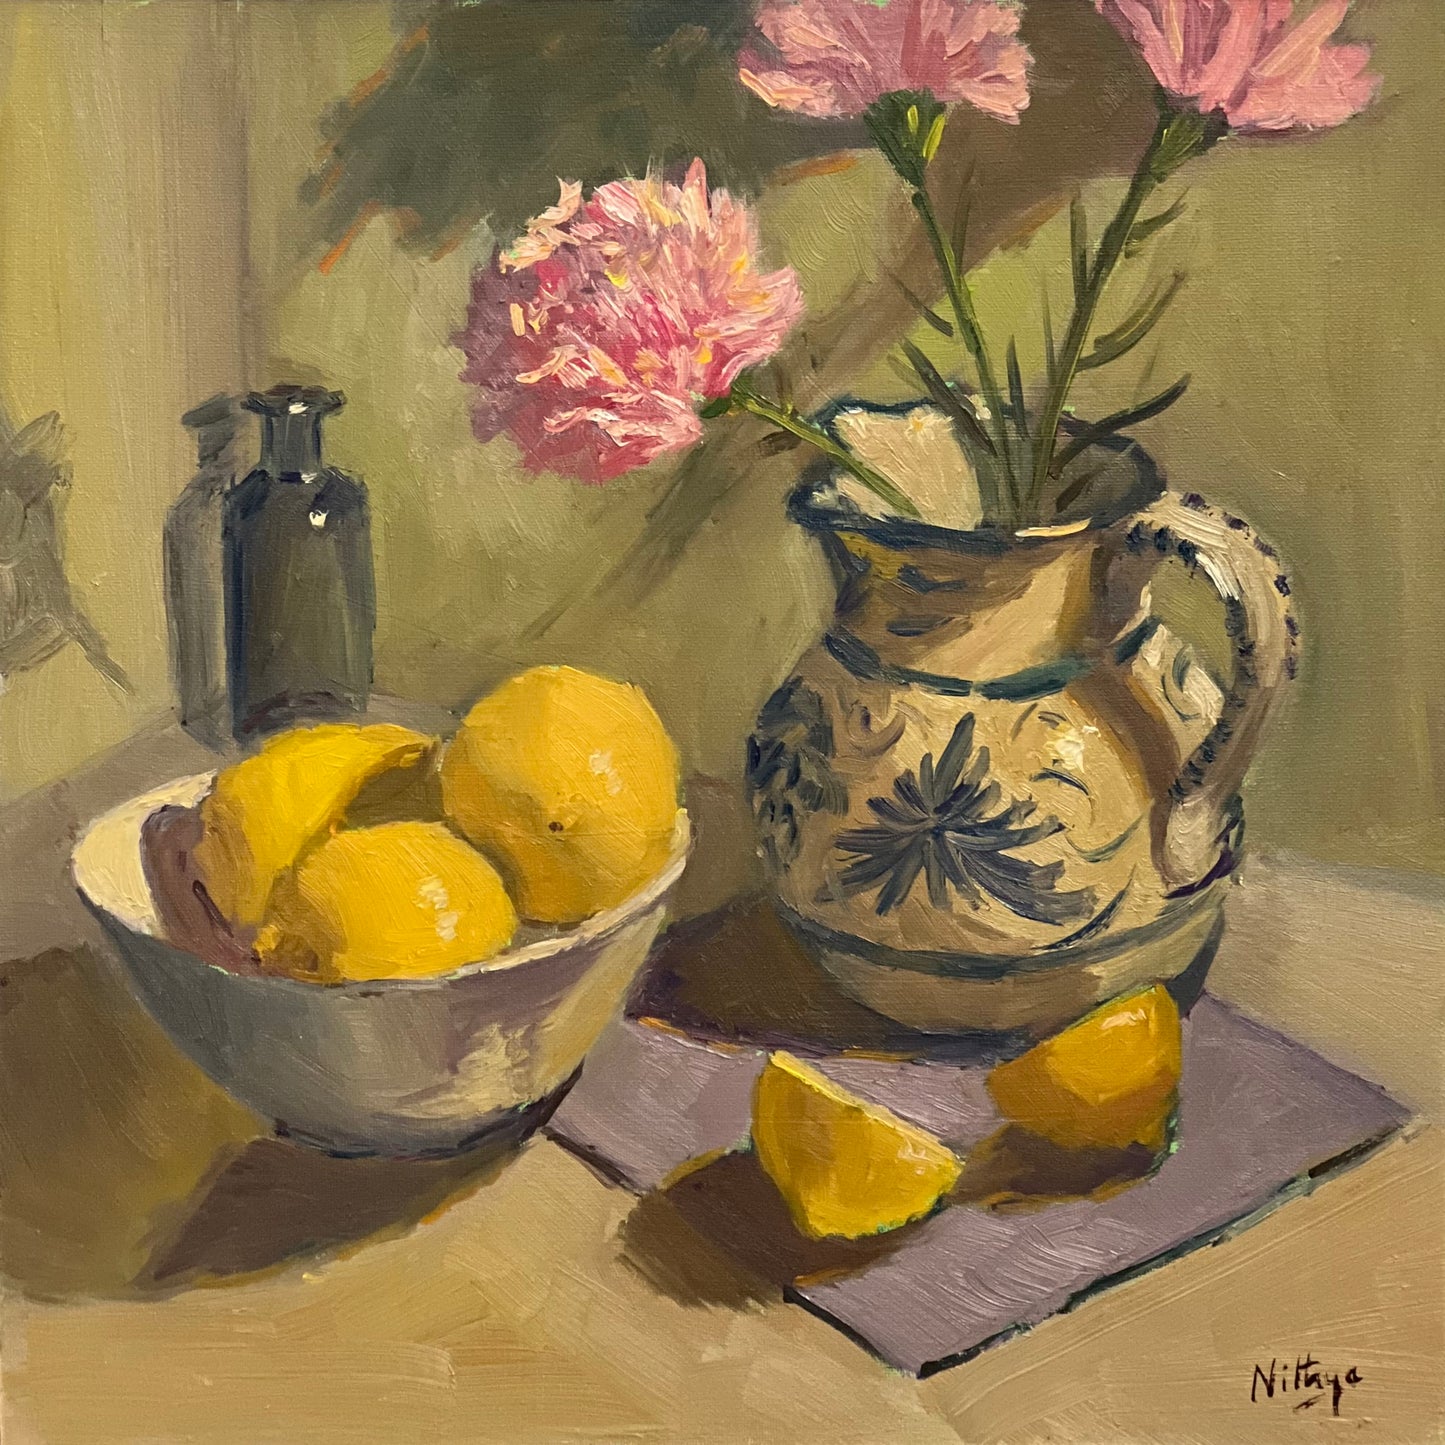 Glowing bowl of lemons and flowers - still life oil painting